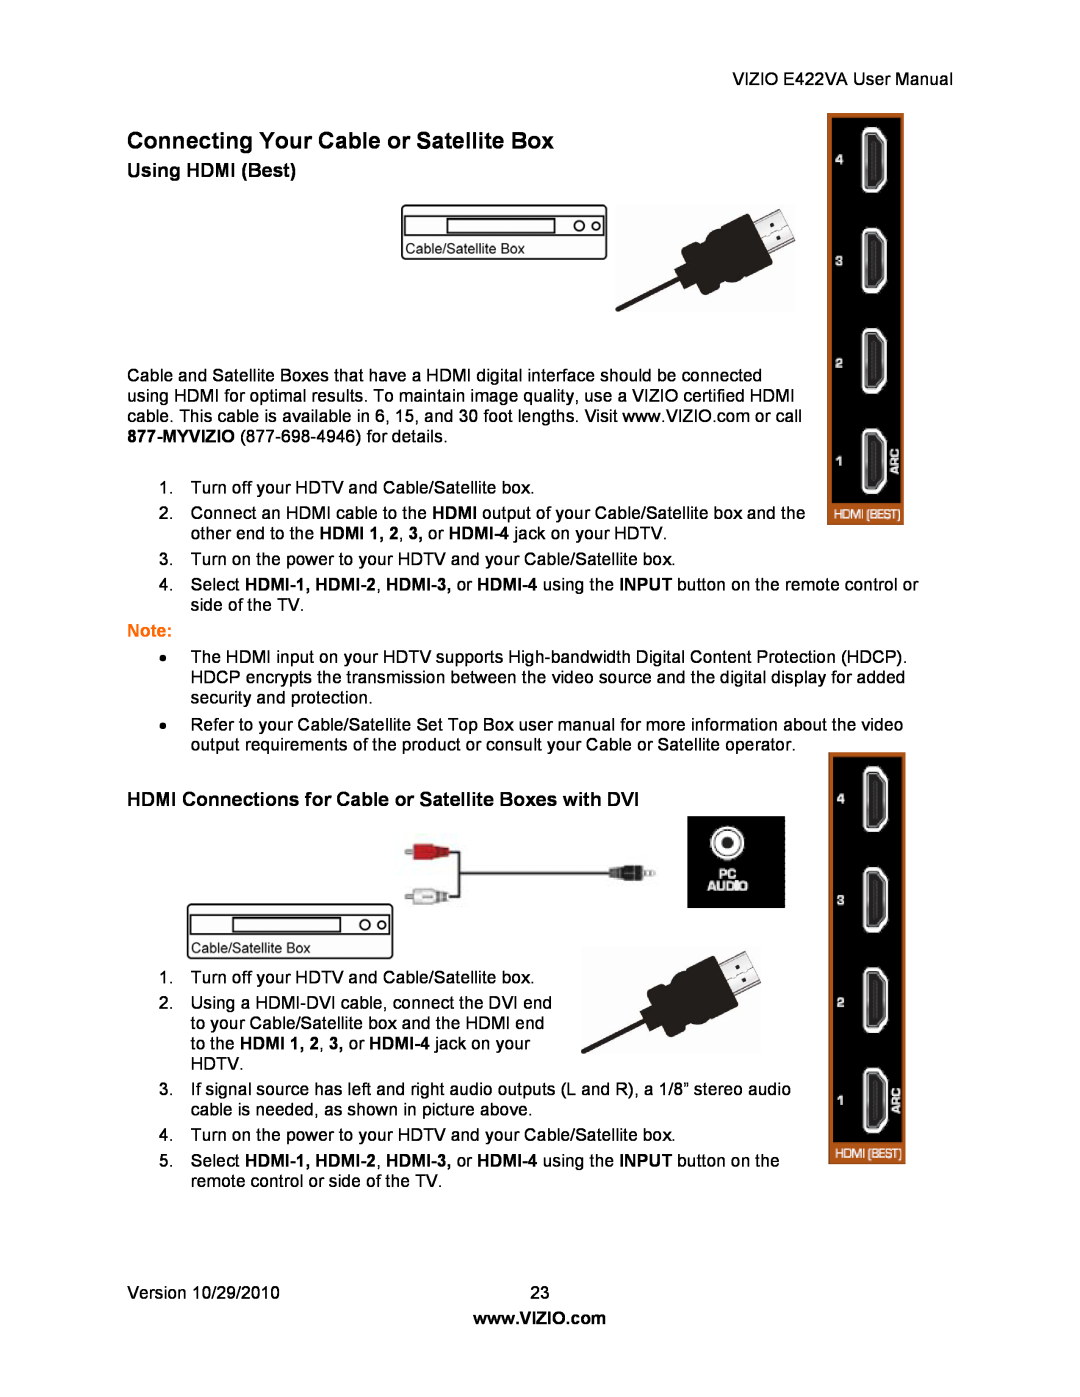 Xerox E422VA user manual Connecting Your Cable or Satellite Box, Using HDMI Best 